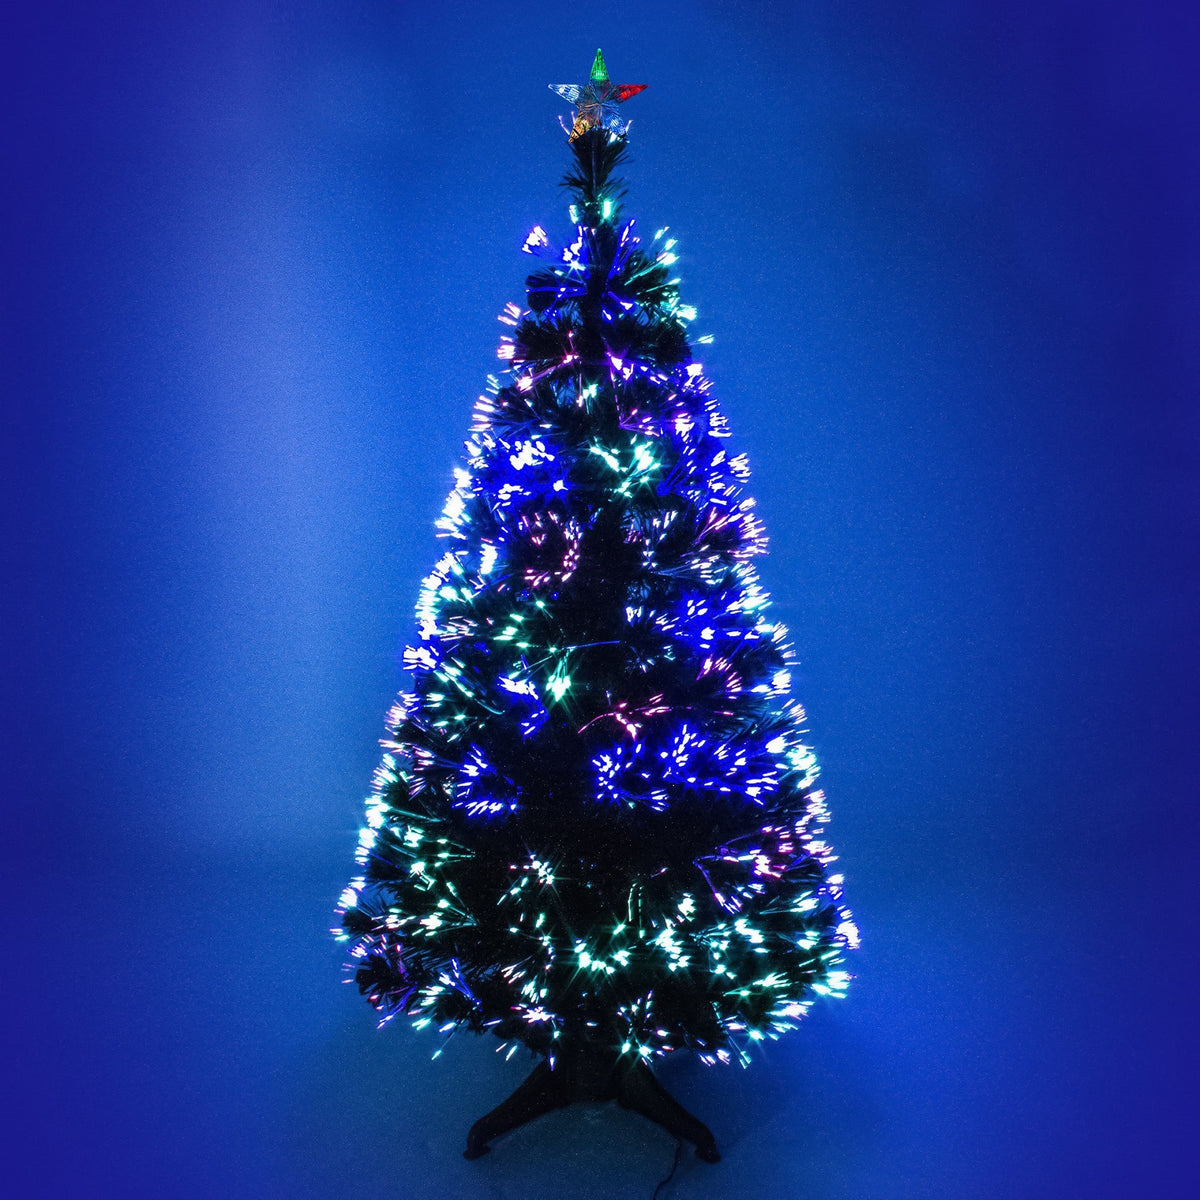 Green Fibre Optic Christmas Tree 2ft to 6ft with Multicoloured Fibre Optic Lights